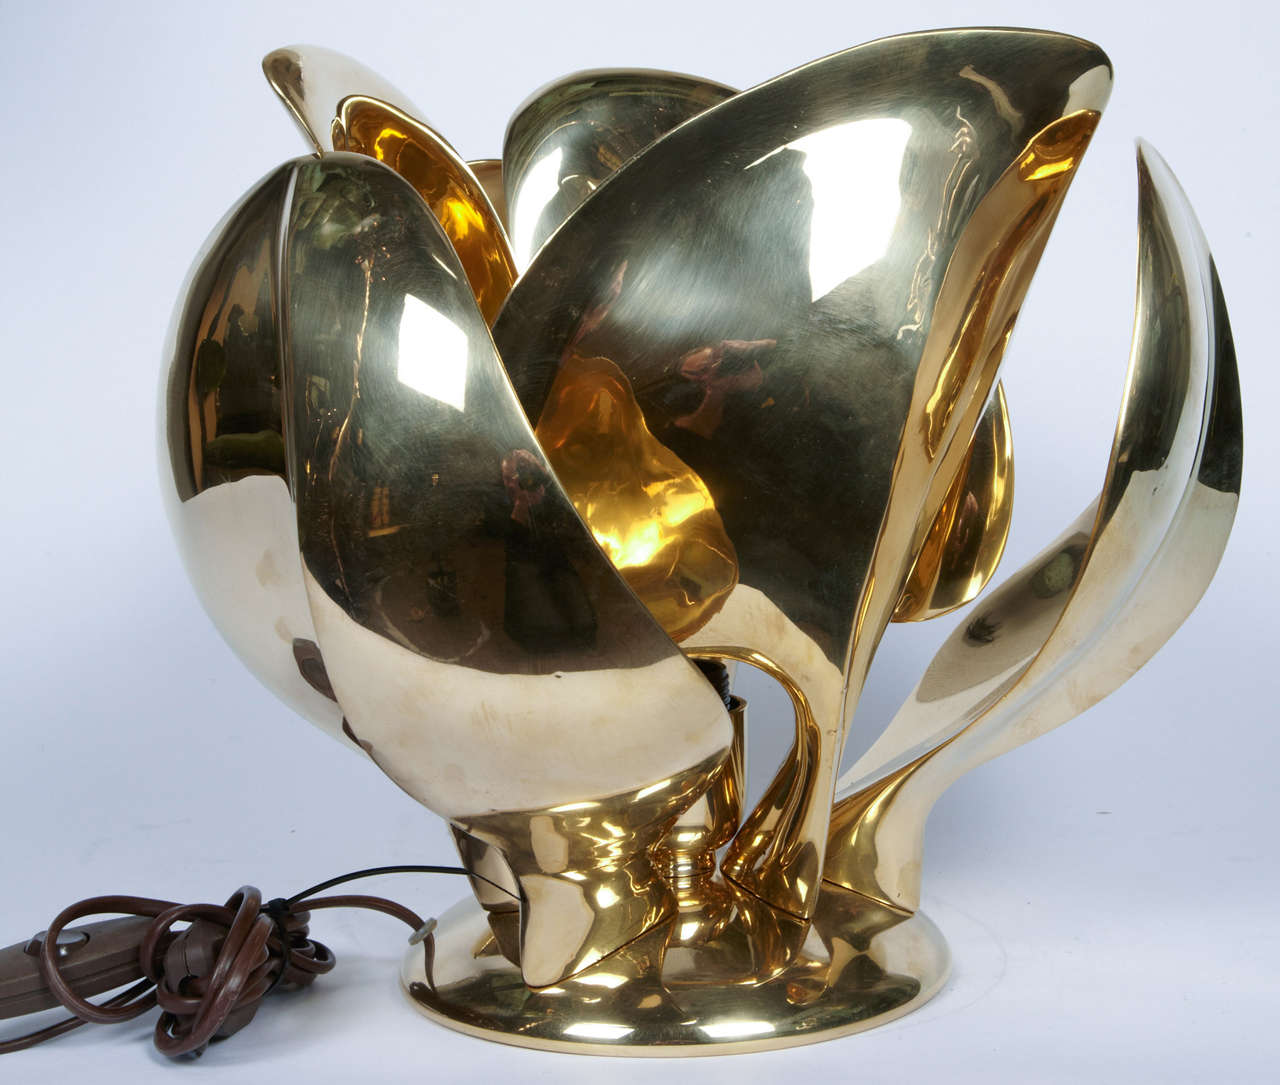 This is a rare and fantastic 1970s sculptural lamp in polished solid bronze.